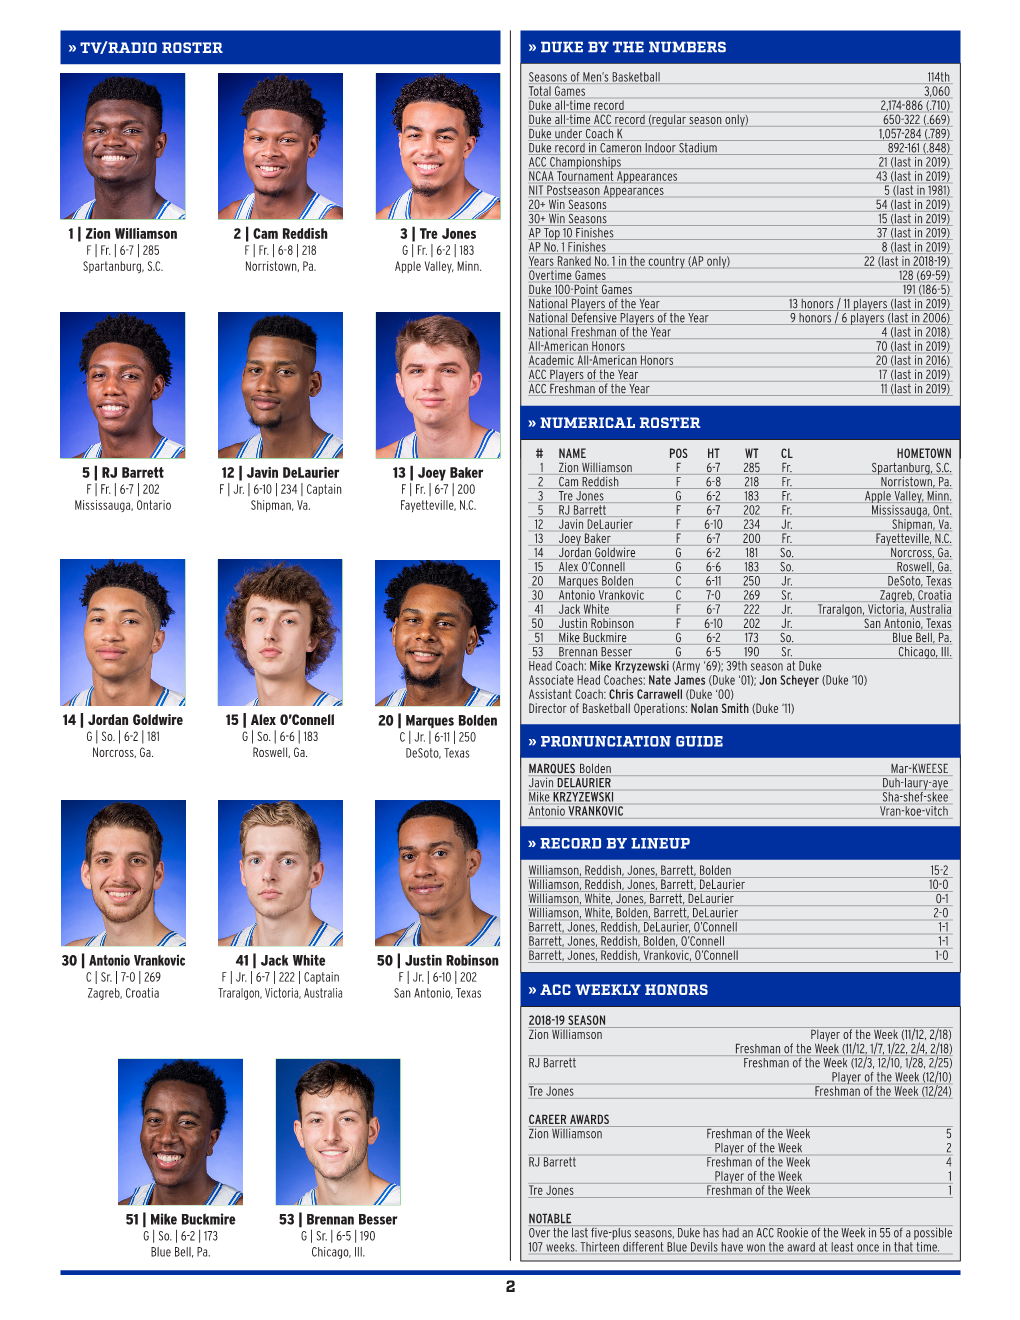 » Numerical Roster » Duke by the Numbers »